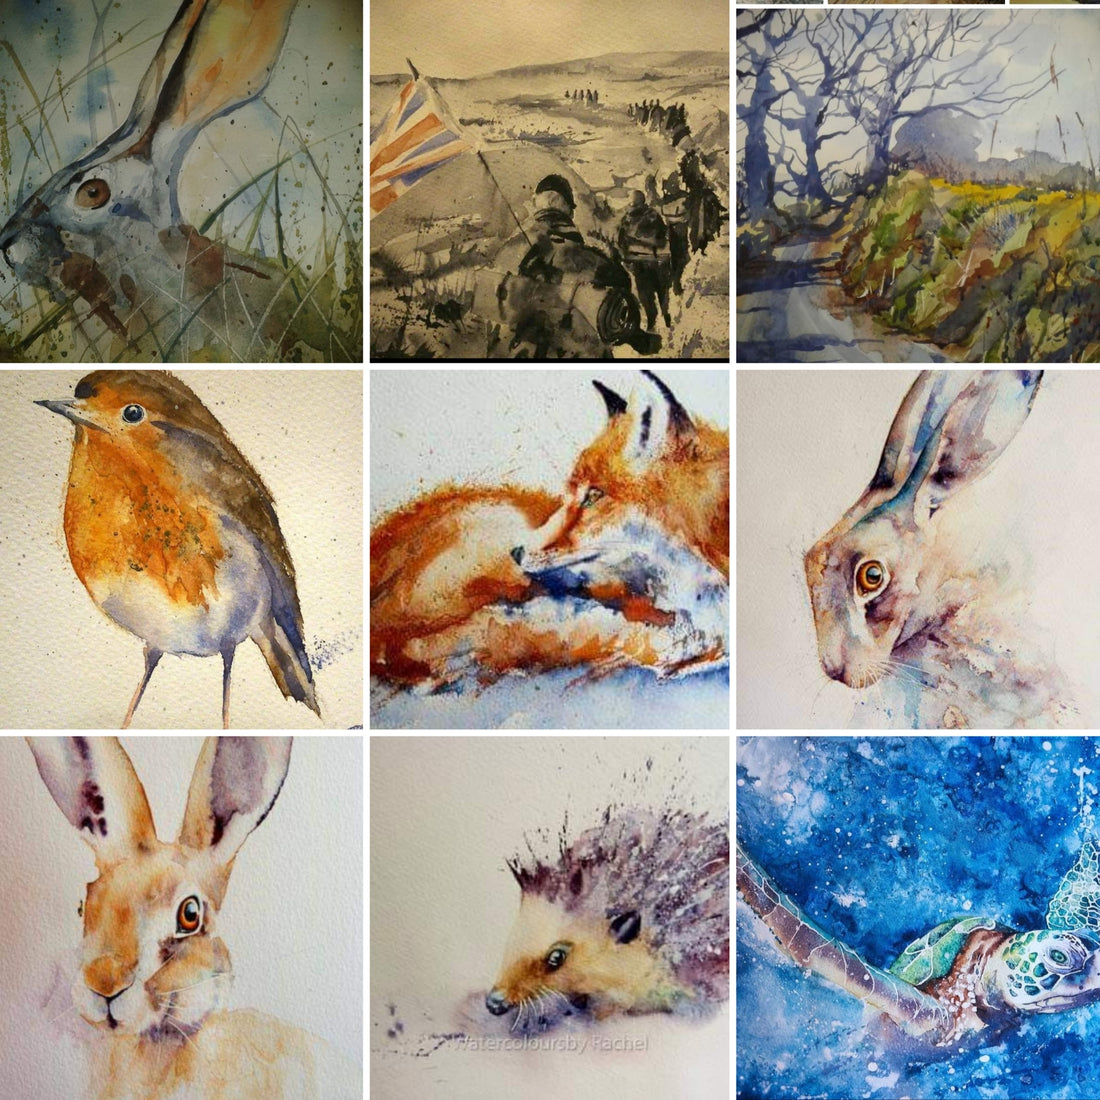 A Watercolour Retrospective , it's good to look back as well as forward